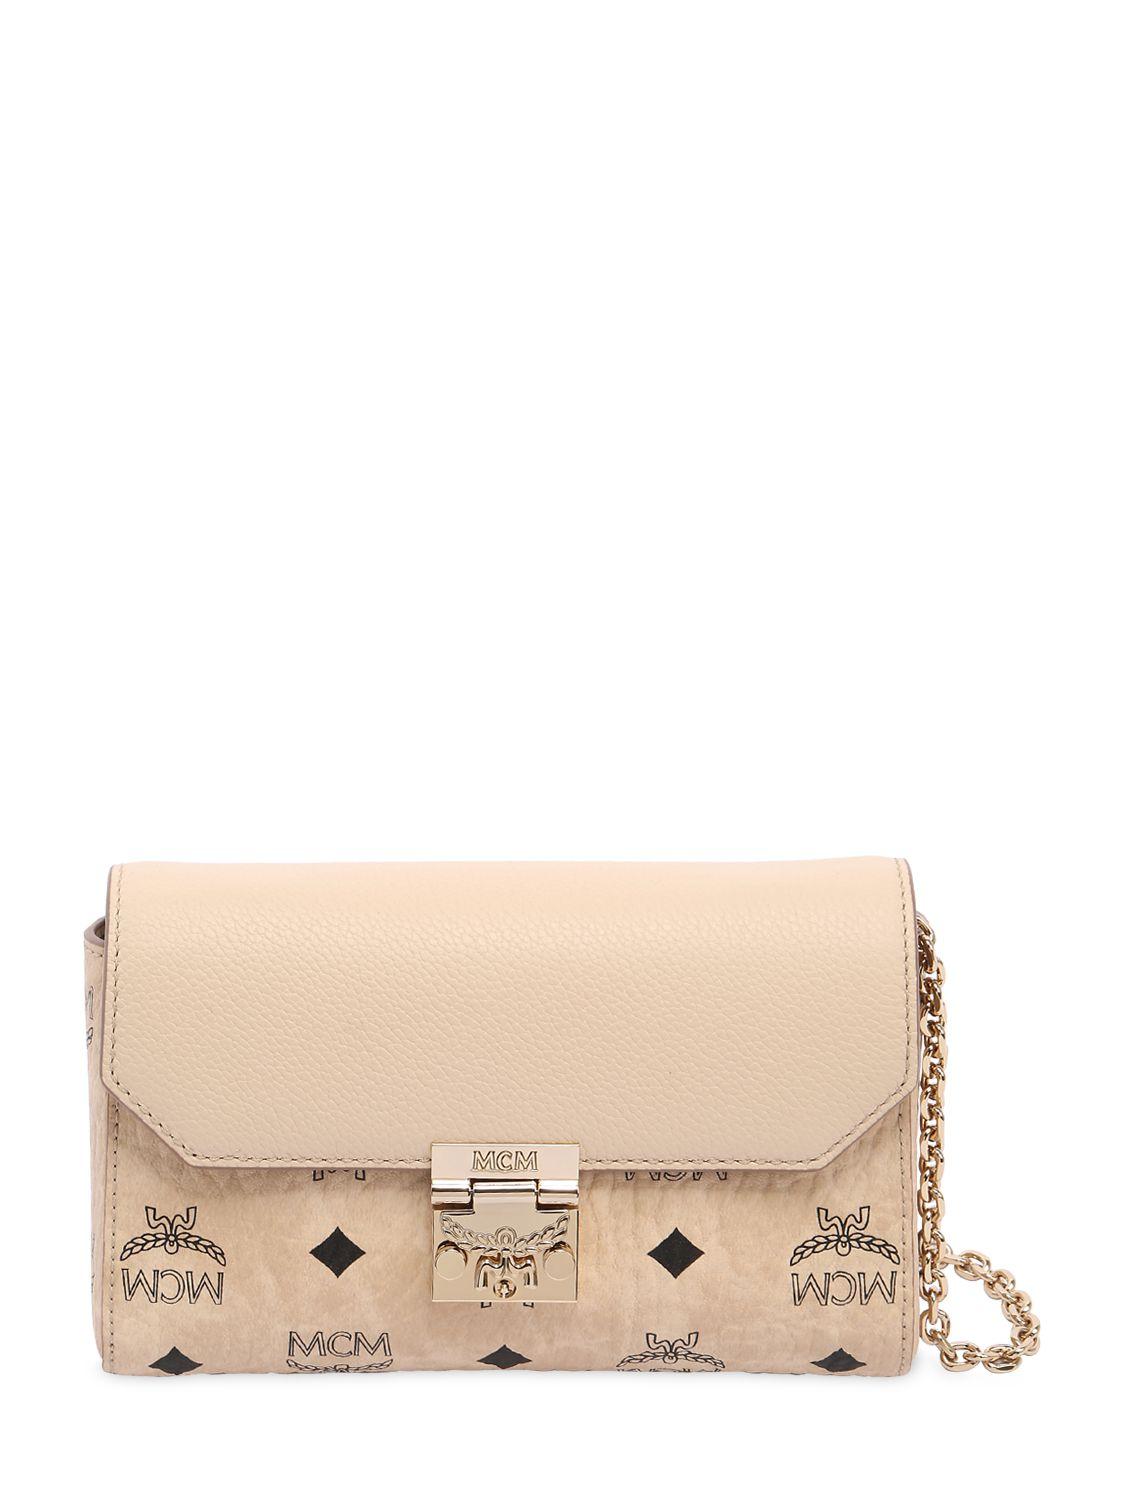 Mcm Small Millie Leather Crossbody Bag in Natural | Lyst